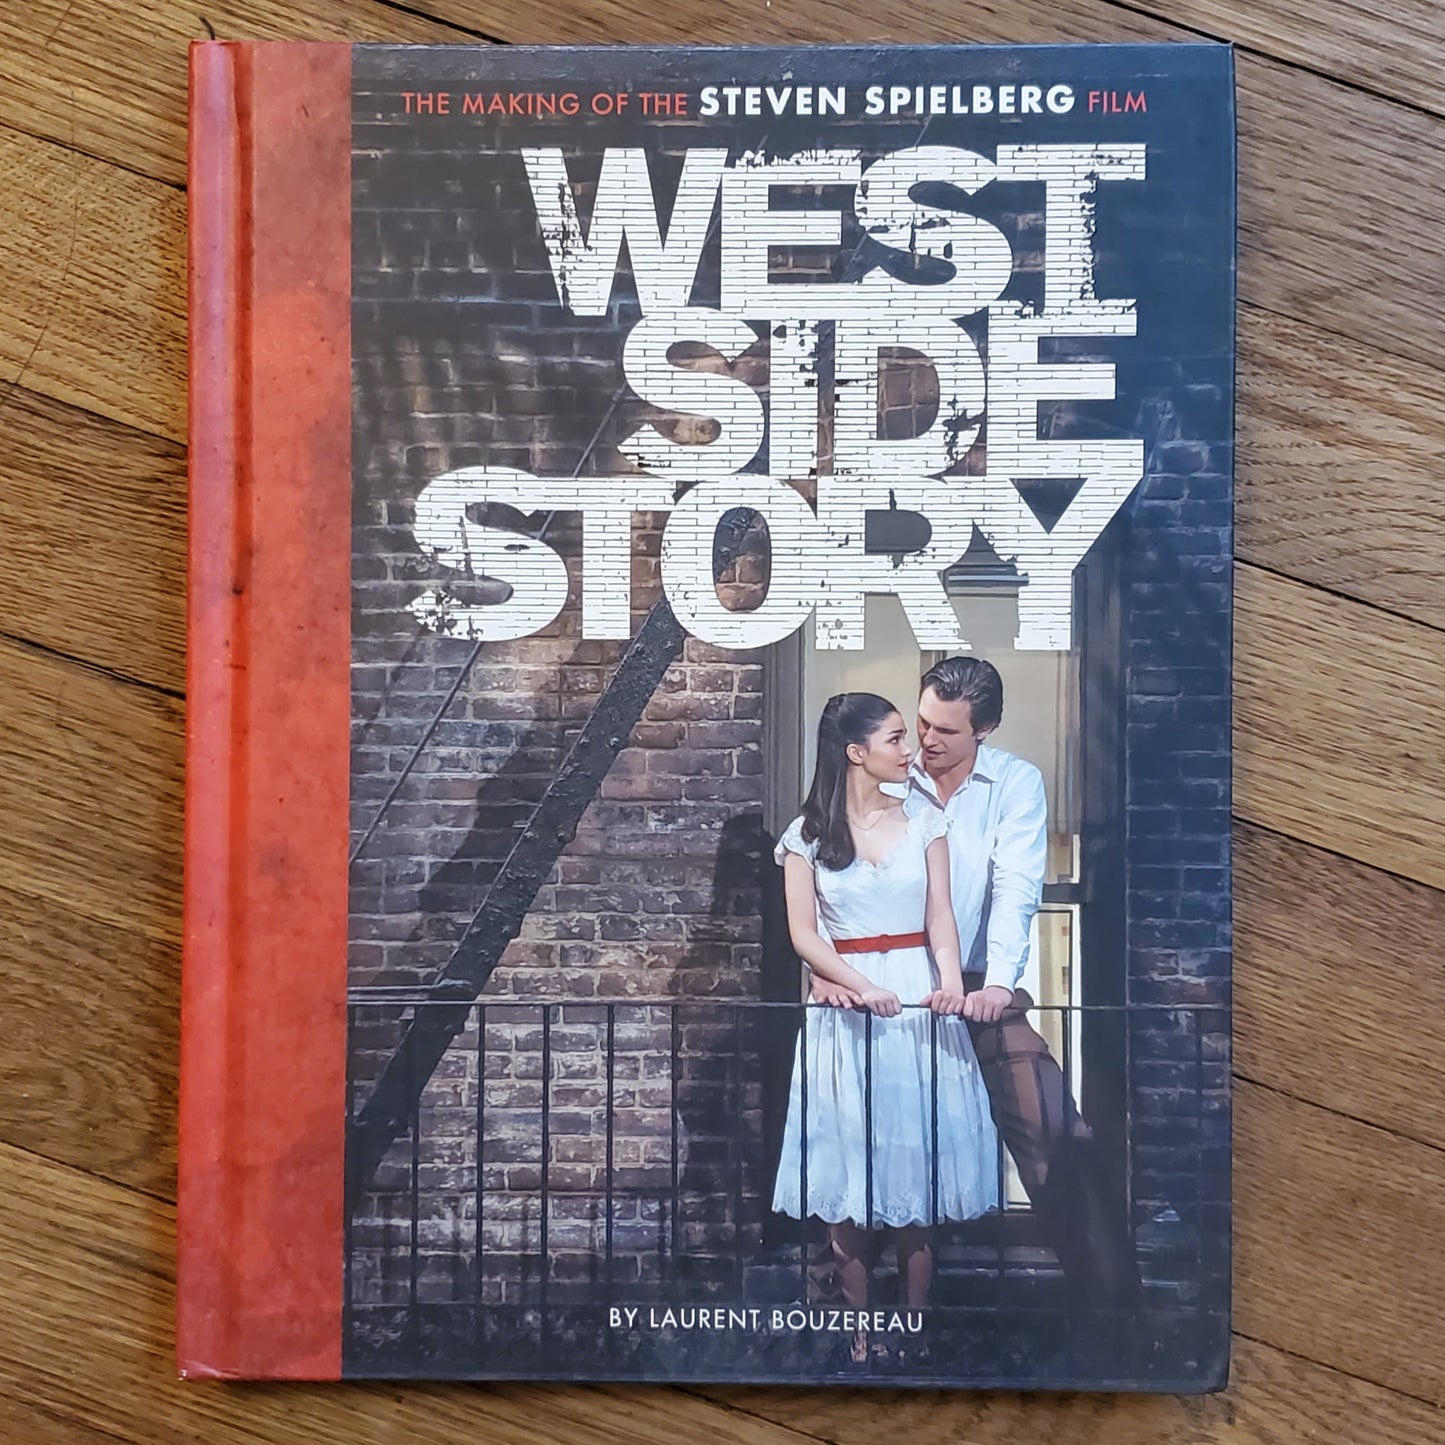 GB West Side Story: The Making of the Steven Spielberg Film